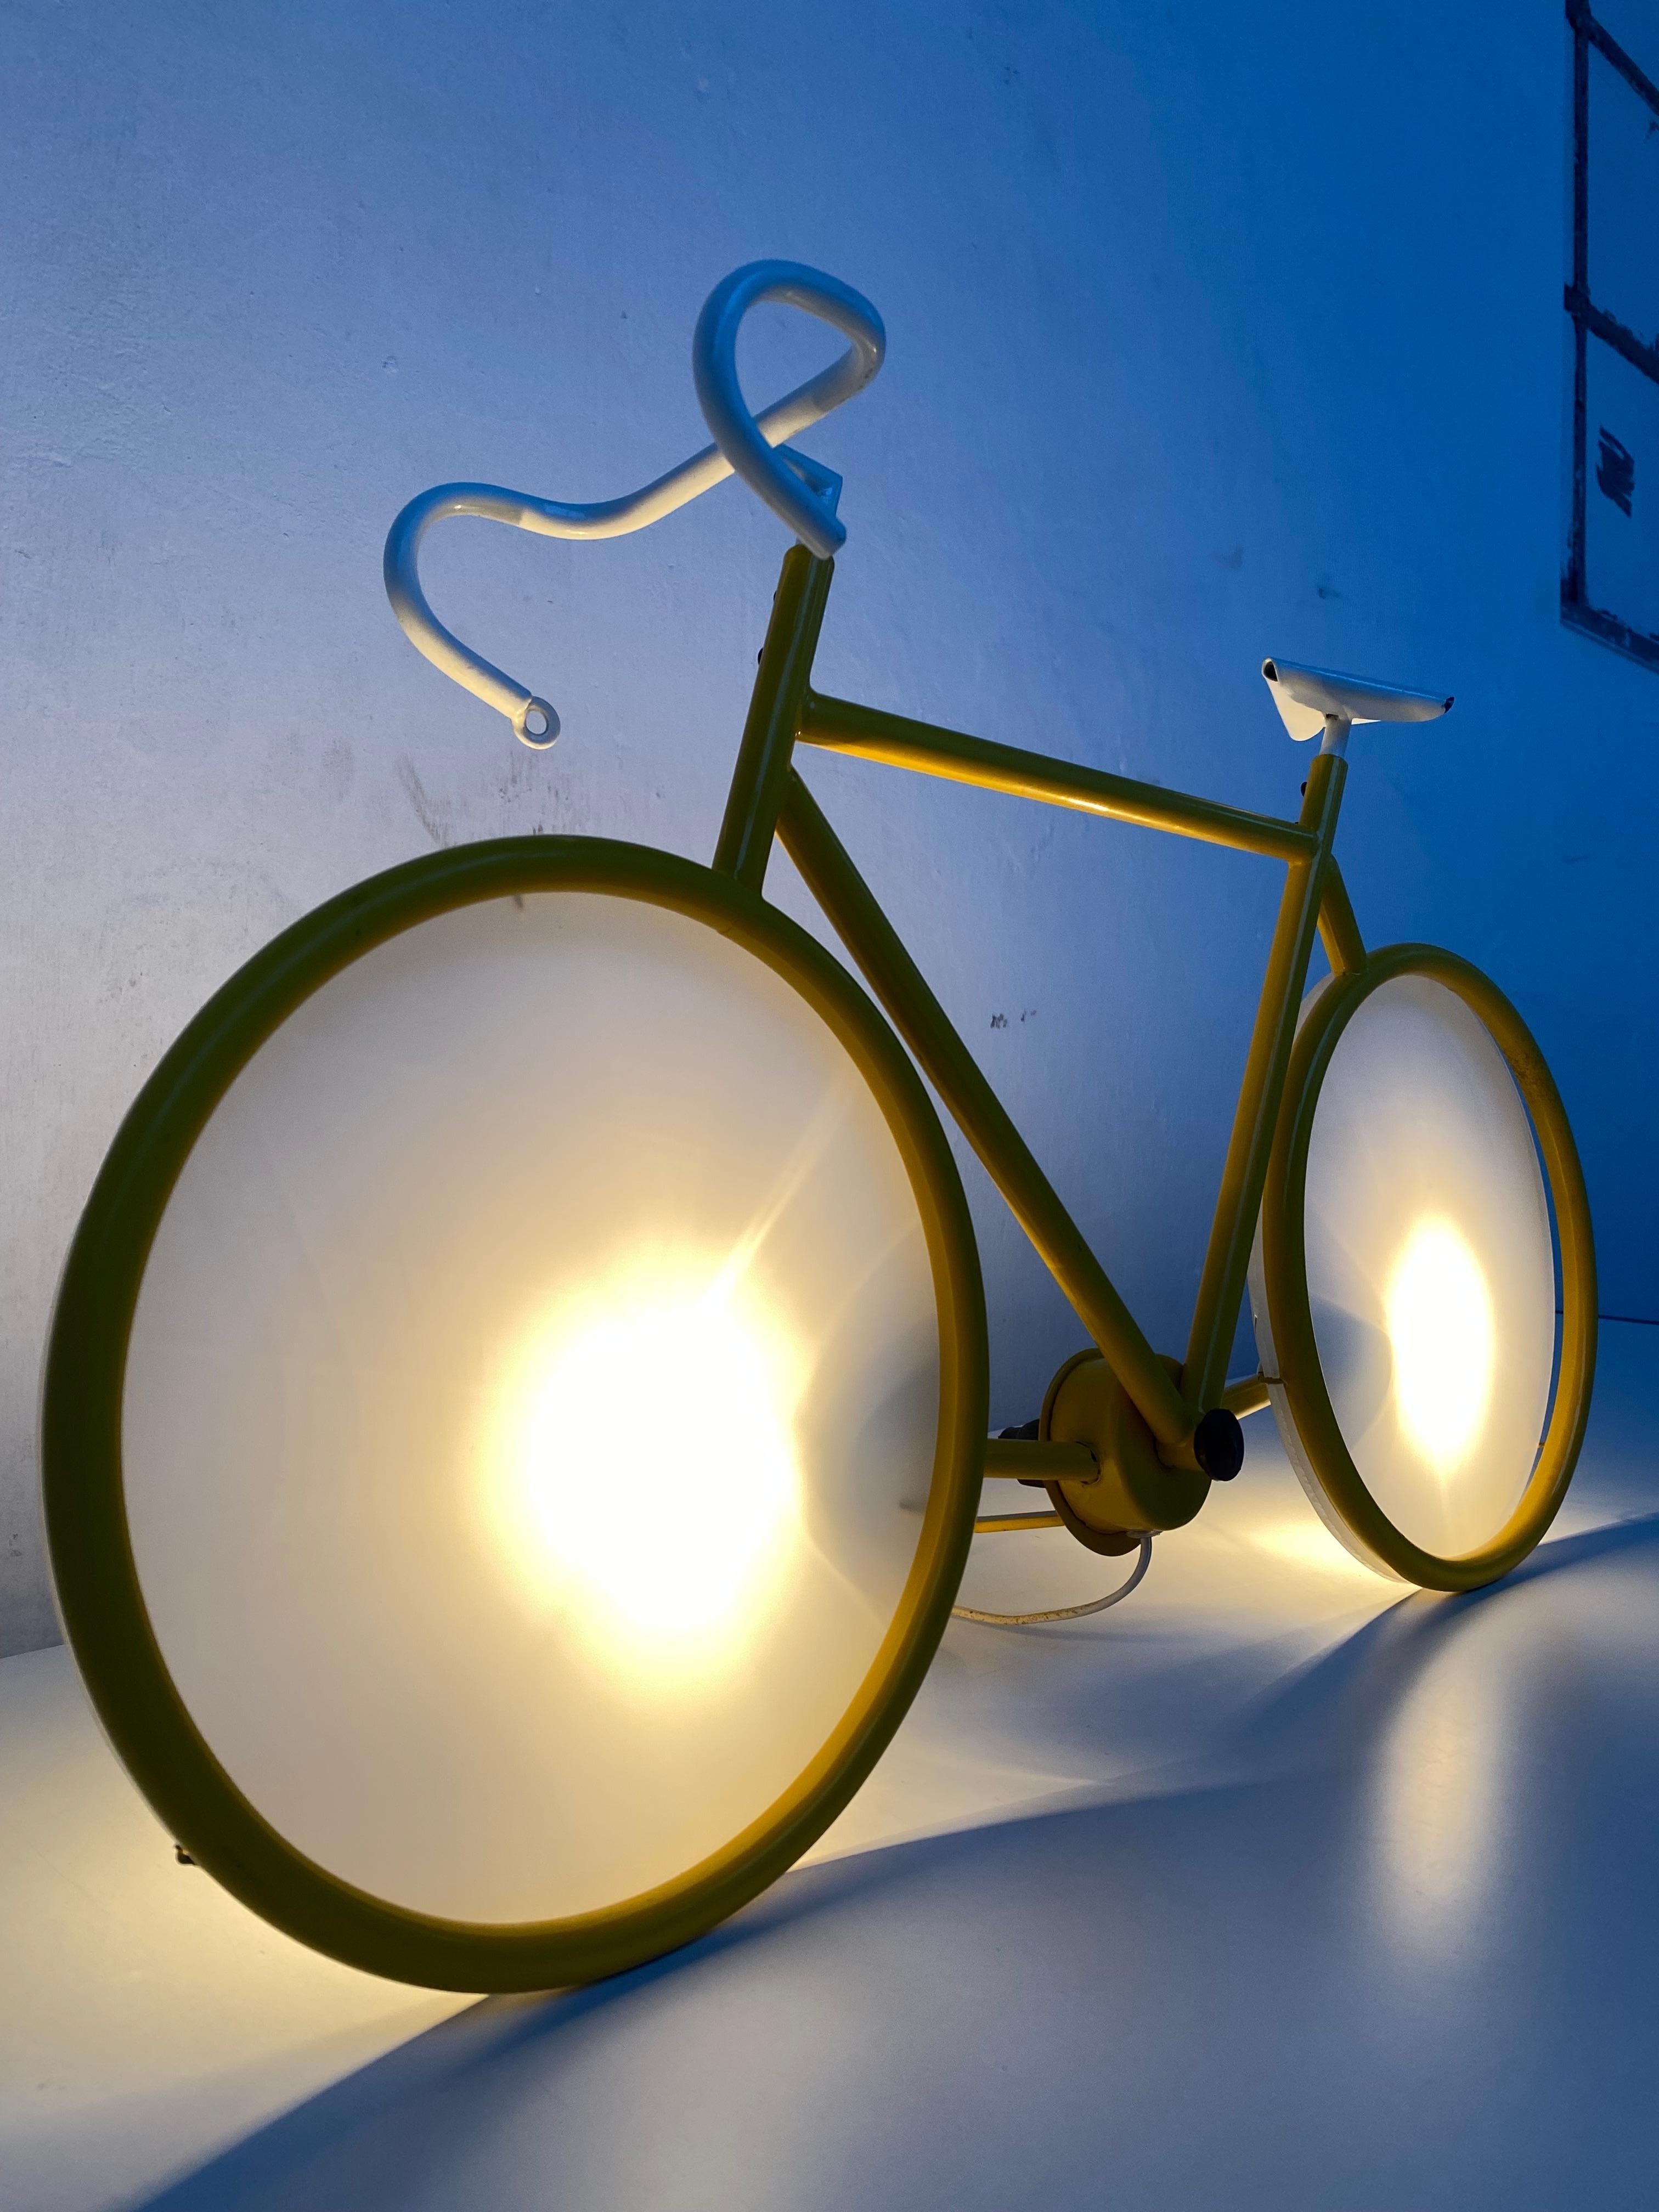 Metal Yellow Pop Art Racing Bicycle Wall or Table Lamp by Zicoli, Italy, 1970's For Sale